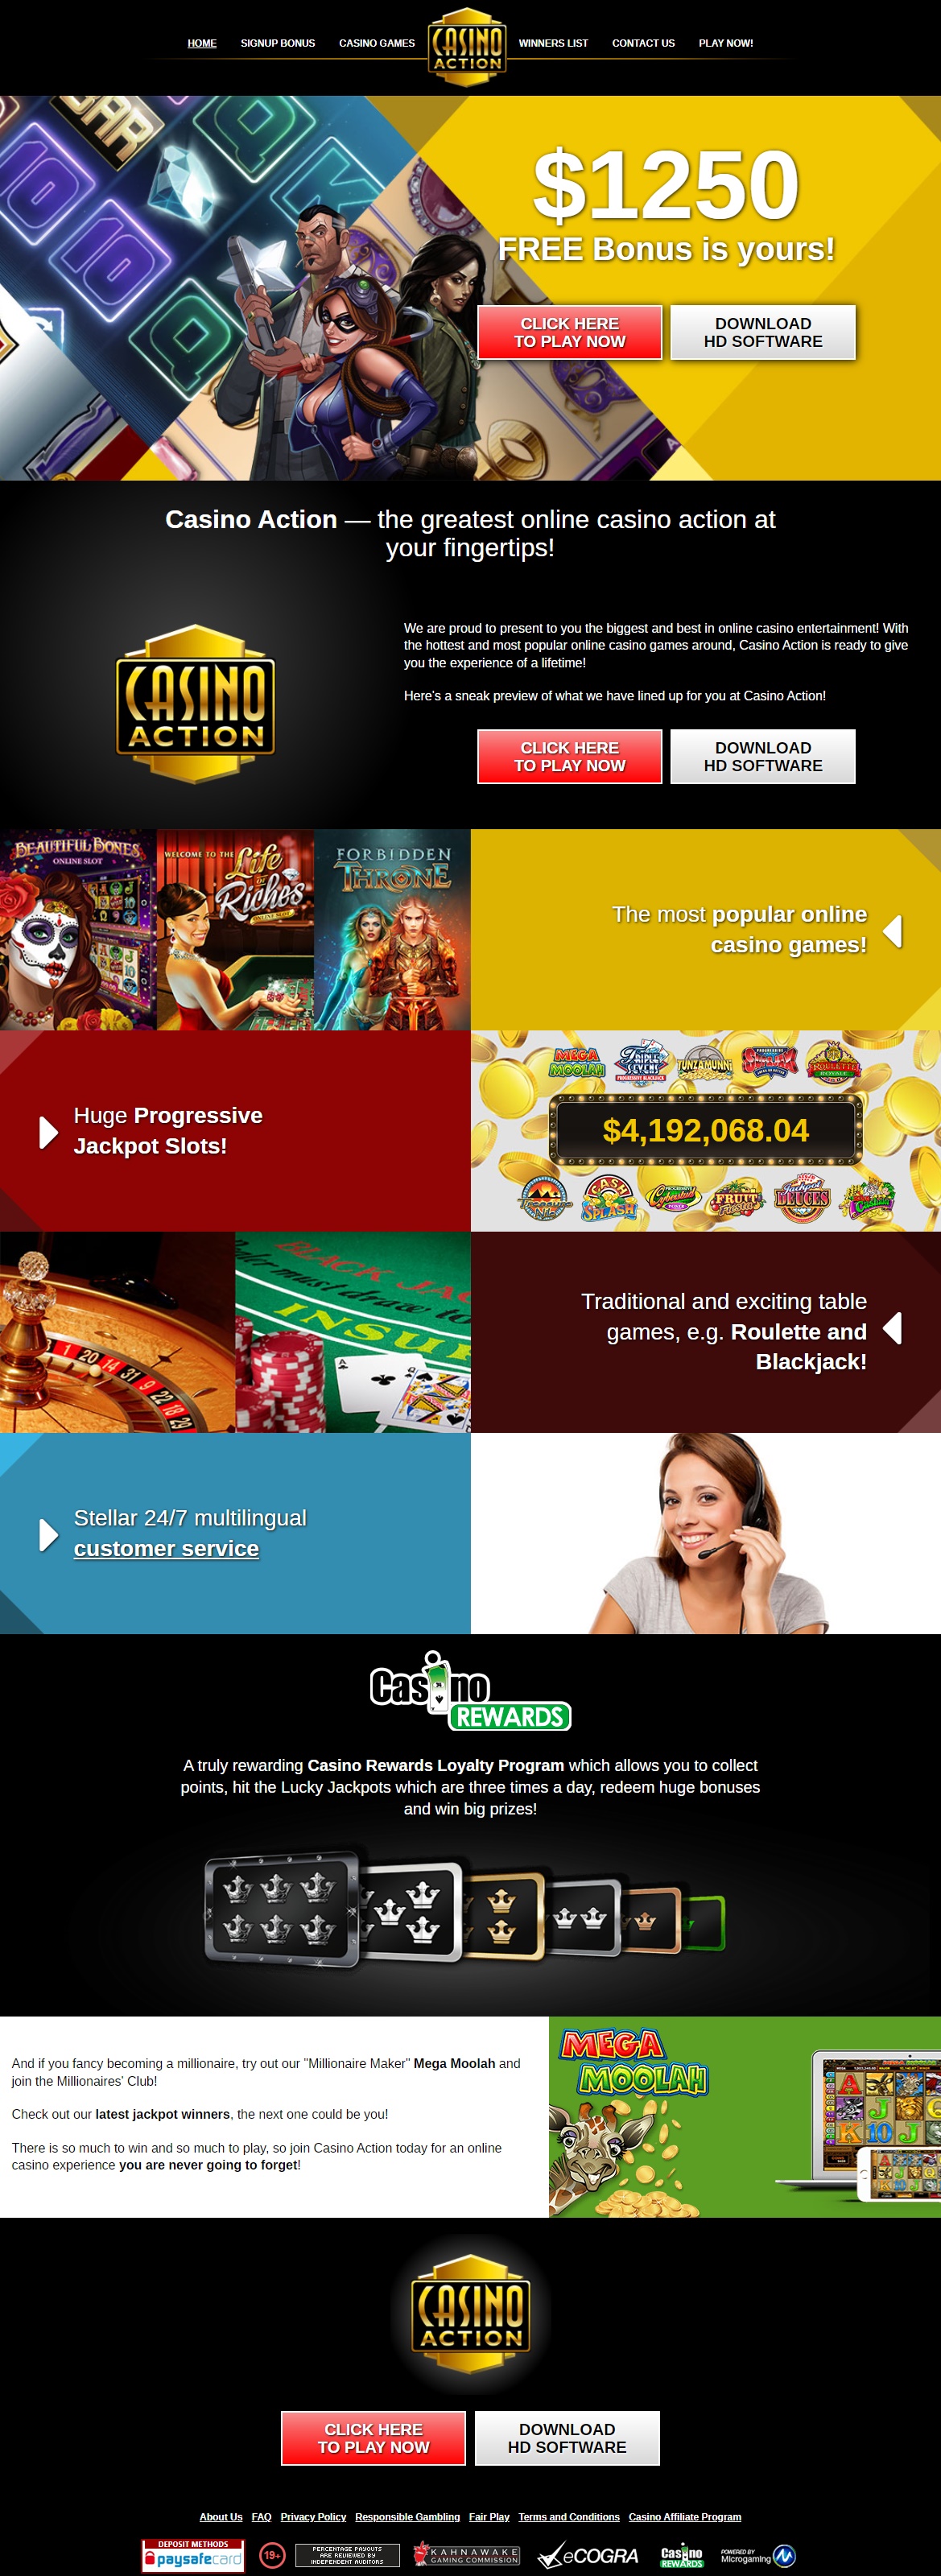 We are proud to present to you the biggest and best in online casino entertainment! Casino Action - the greatest online casino action at your fingertips, Casino Action is ready to give you the experience of a lifetime! Here's a sneak preview of what we have lined up for you at Casino Action! The most popular online casino games offering the biggest wins, the hottest graphics, and the most exciting features! Huge Progressive Jackpot Slots and if you fancy becoming a millionaire, try out their *Millionaire Maker* Mega Moolah and join the Millionaires Club! Traditional and exciting table games, e.g. Roulette and Blackjack! Casino Action maintains a 24 hours 7 days a week Multilingual Customer Service to handle all email and live chat queries. There is so much to win and so much to play, so join Casino Action today for an online casino experience you are never going to forget!